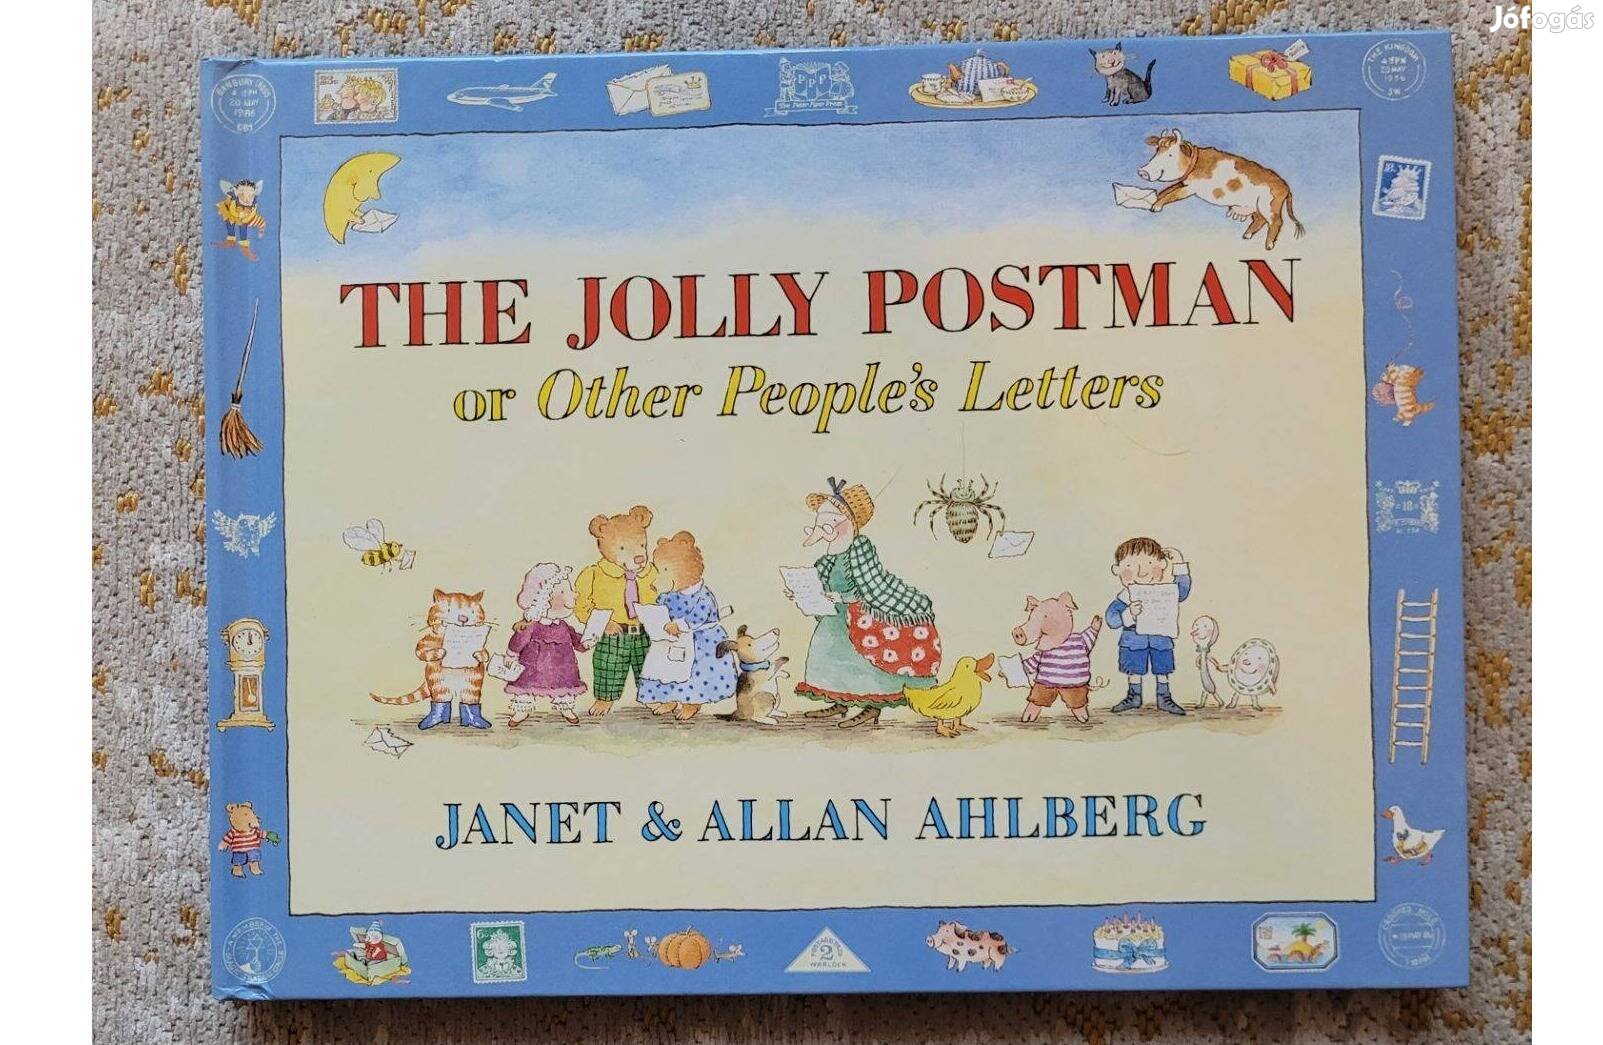 The　XIV.　Postman　Jolly　Other　Budapest　(The　Postman　Letters　Jolly　or　kerület,　People's　1.)